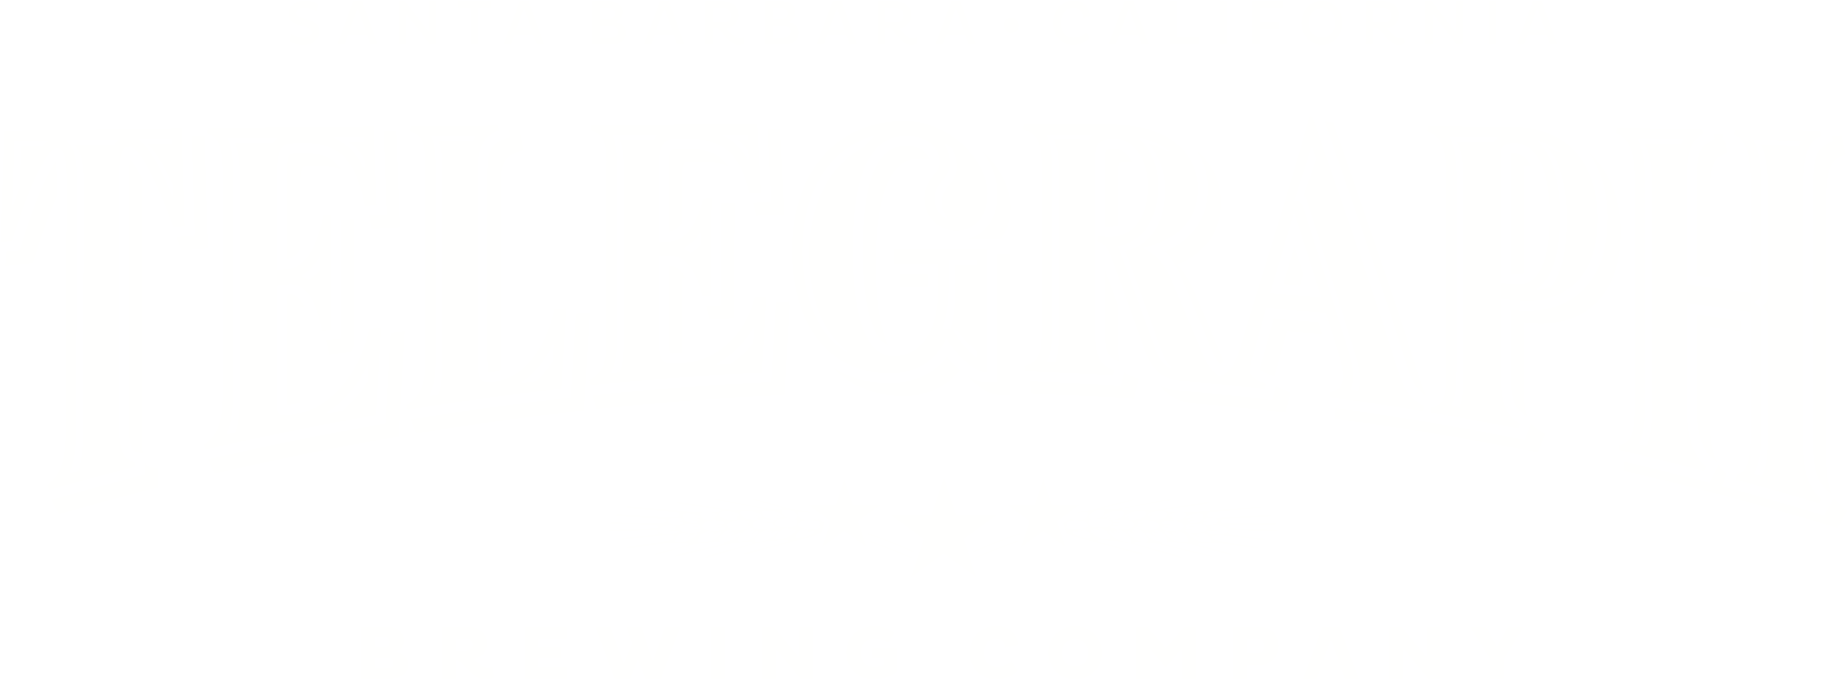 Image Is Not Available - Telegraph Brewing Co. (1848x680), Png Download